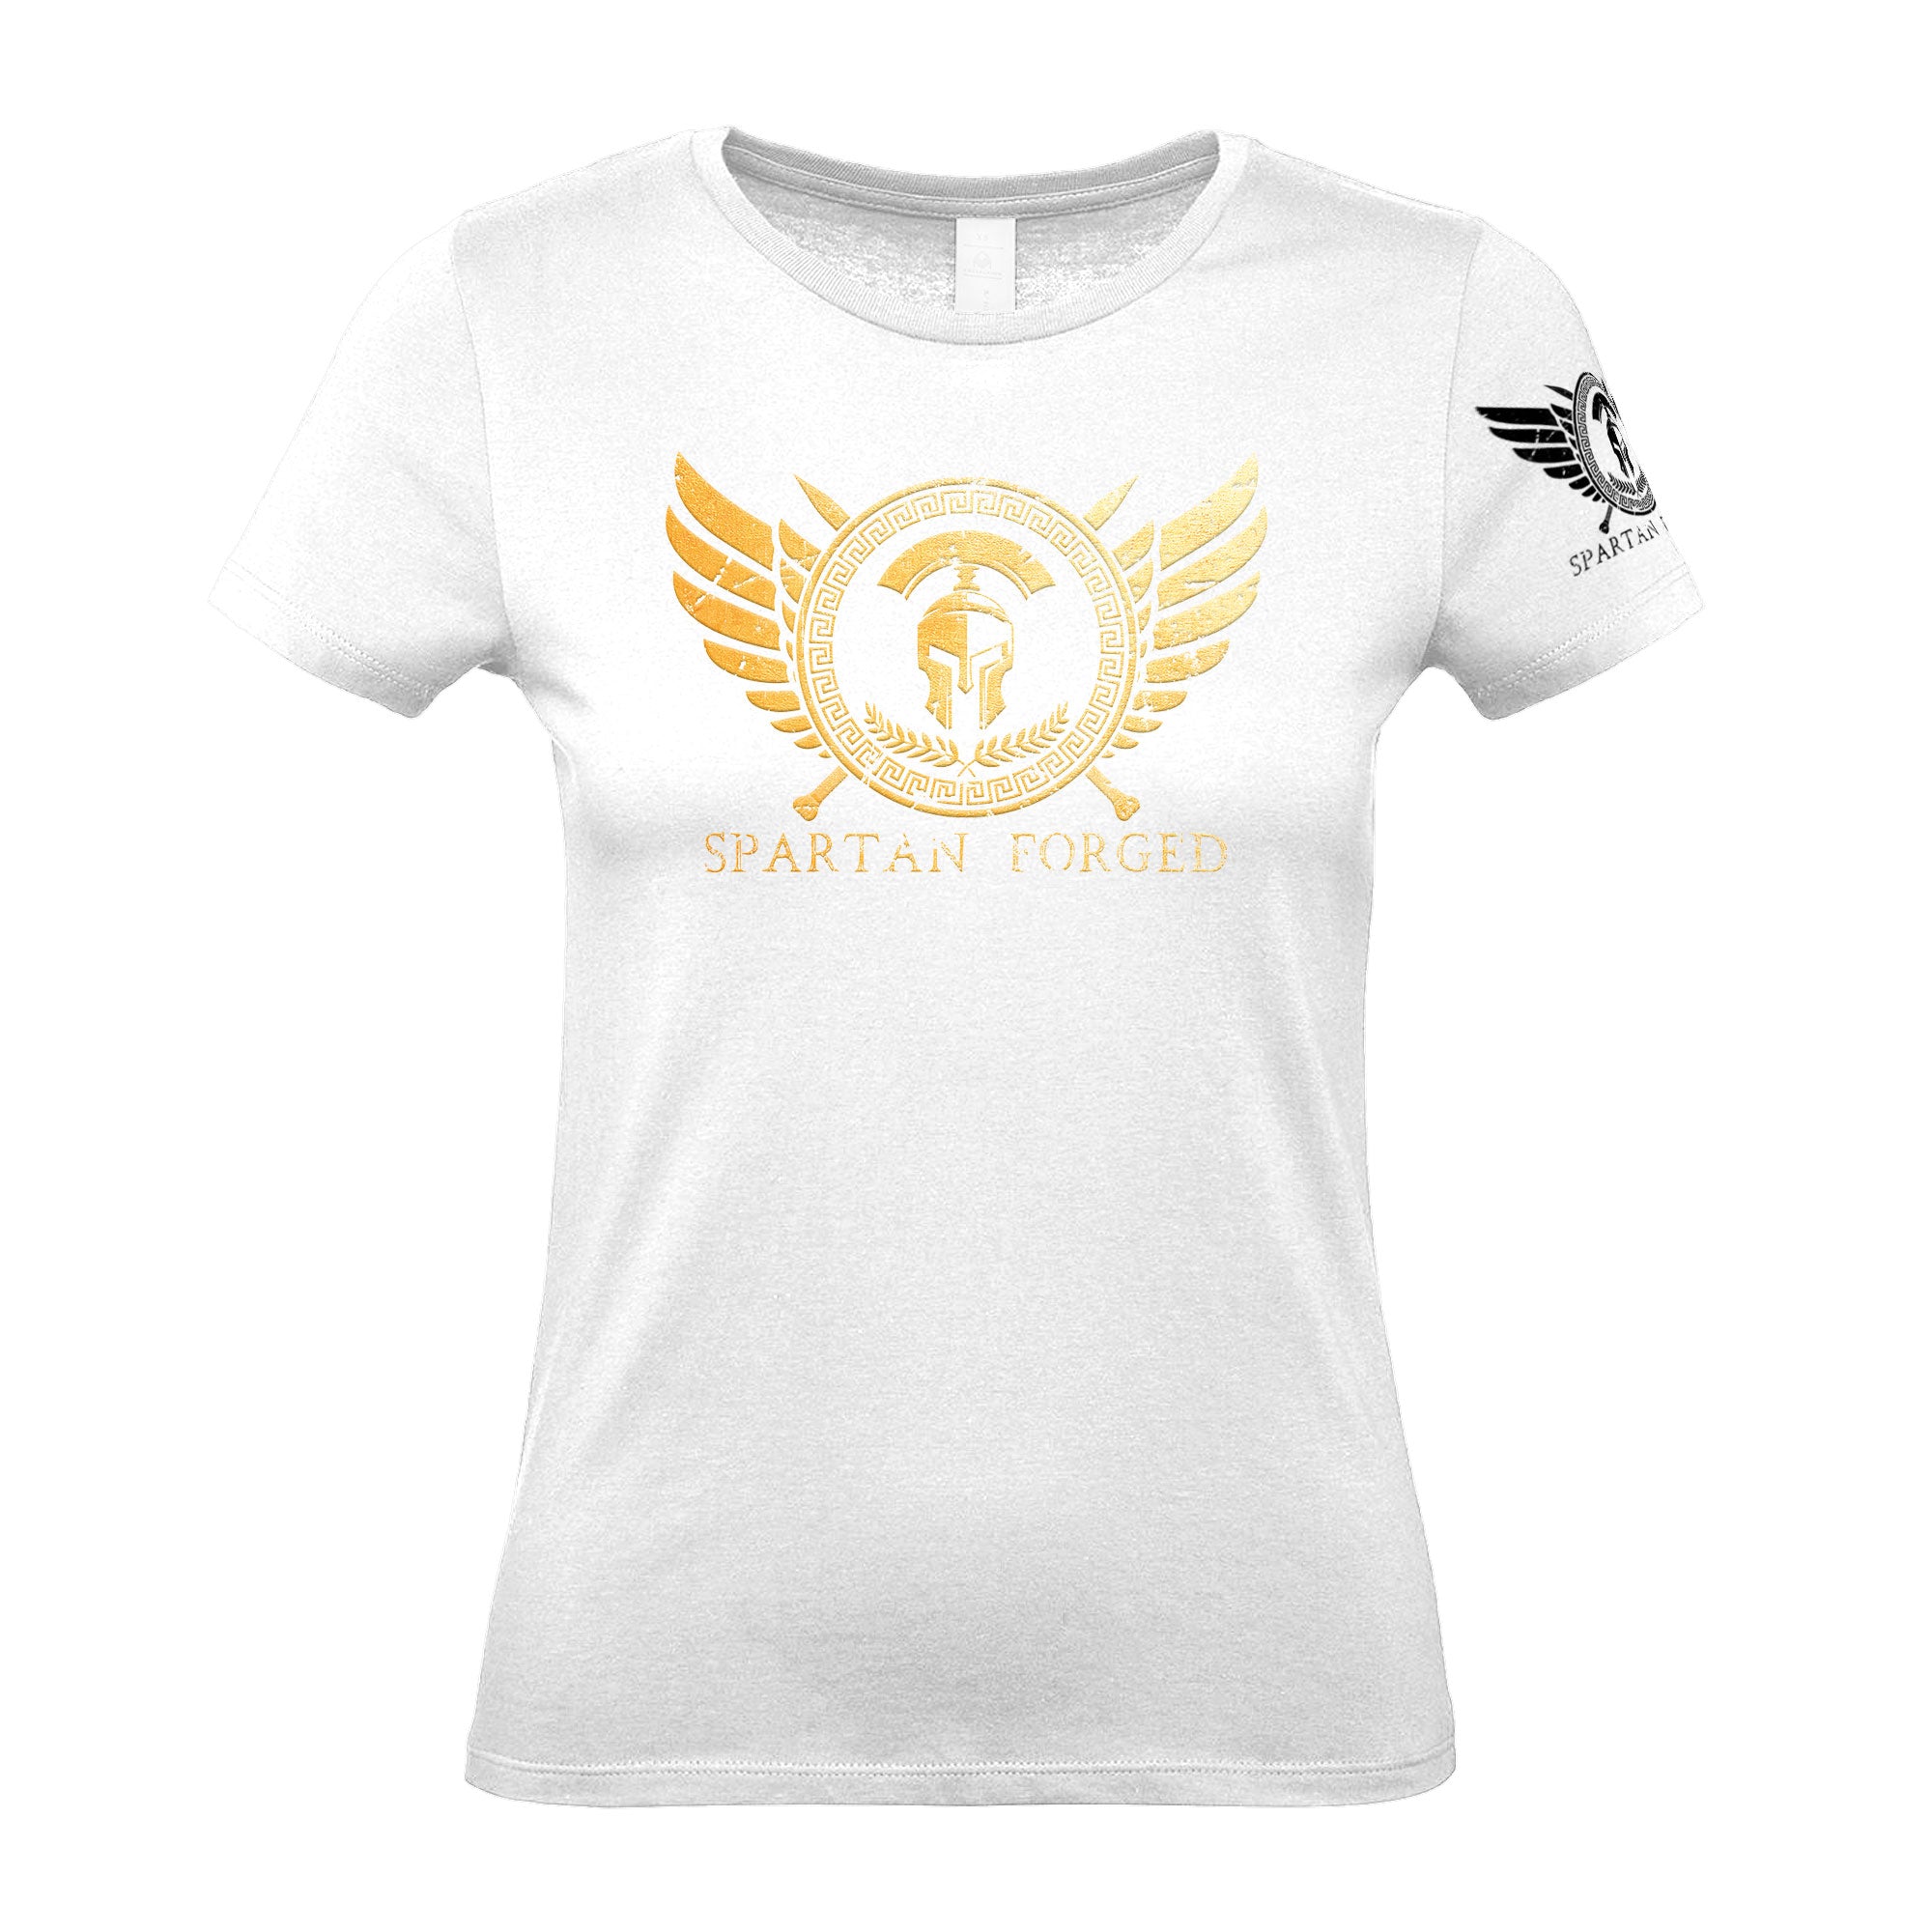 Spartan Forged Chest Gold - Women's Gym T-Shirt